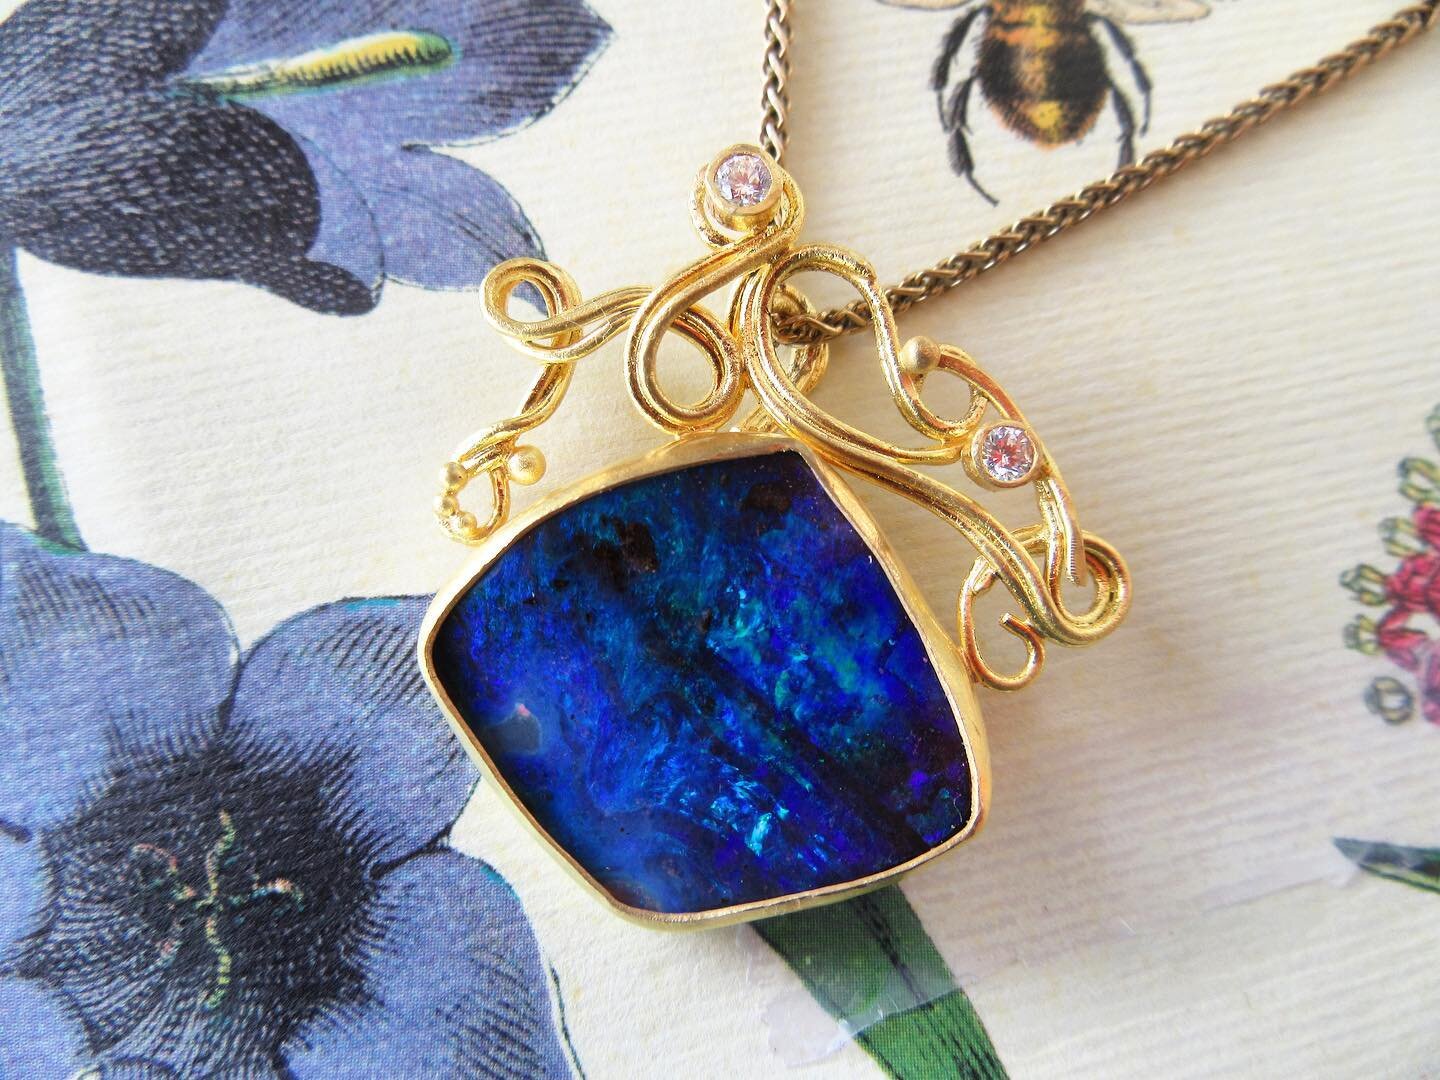 Look at the piece! It was made as a special, one of a kind Valentine&rsquo;s Day gift. This piece was made with a 17.11 carat Boulder Opal set in 22k gold fused with design swirls. Each diamond weighs .07 carats 💎
.
.
.
#karenldavidson #karendavidso